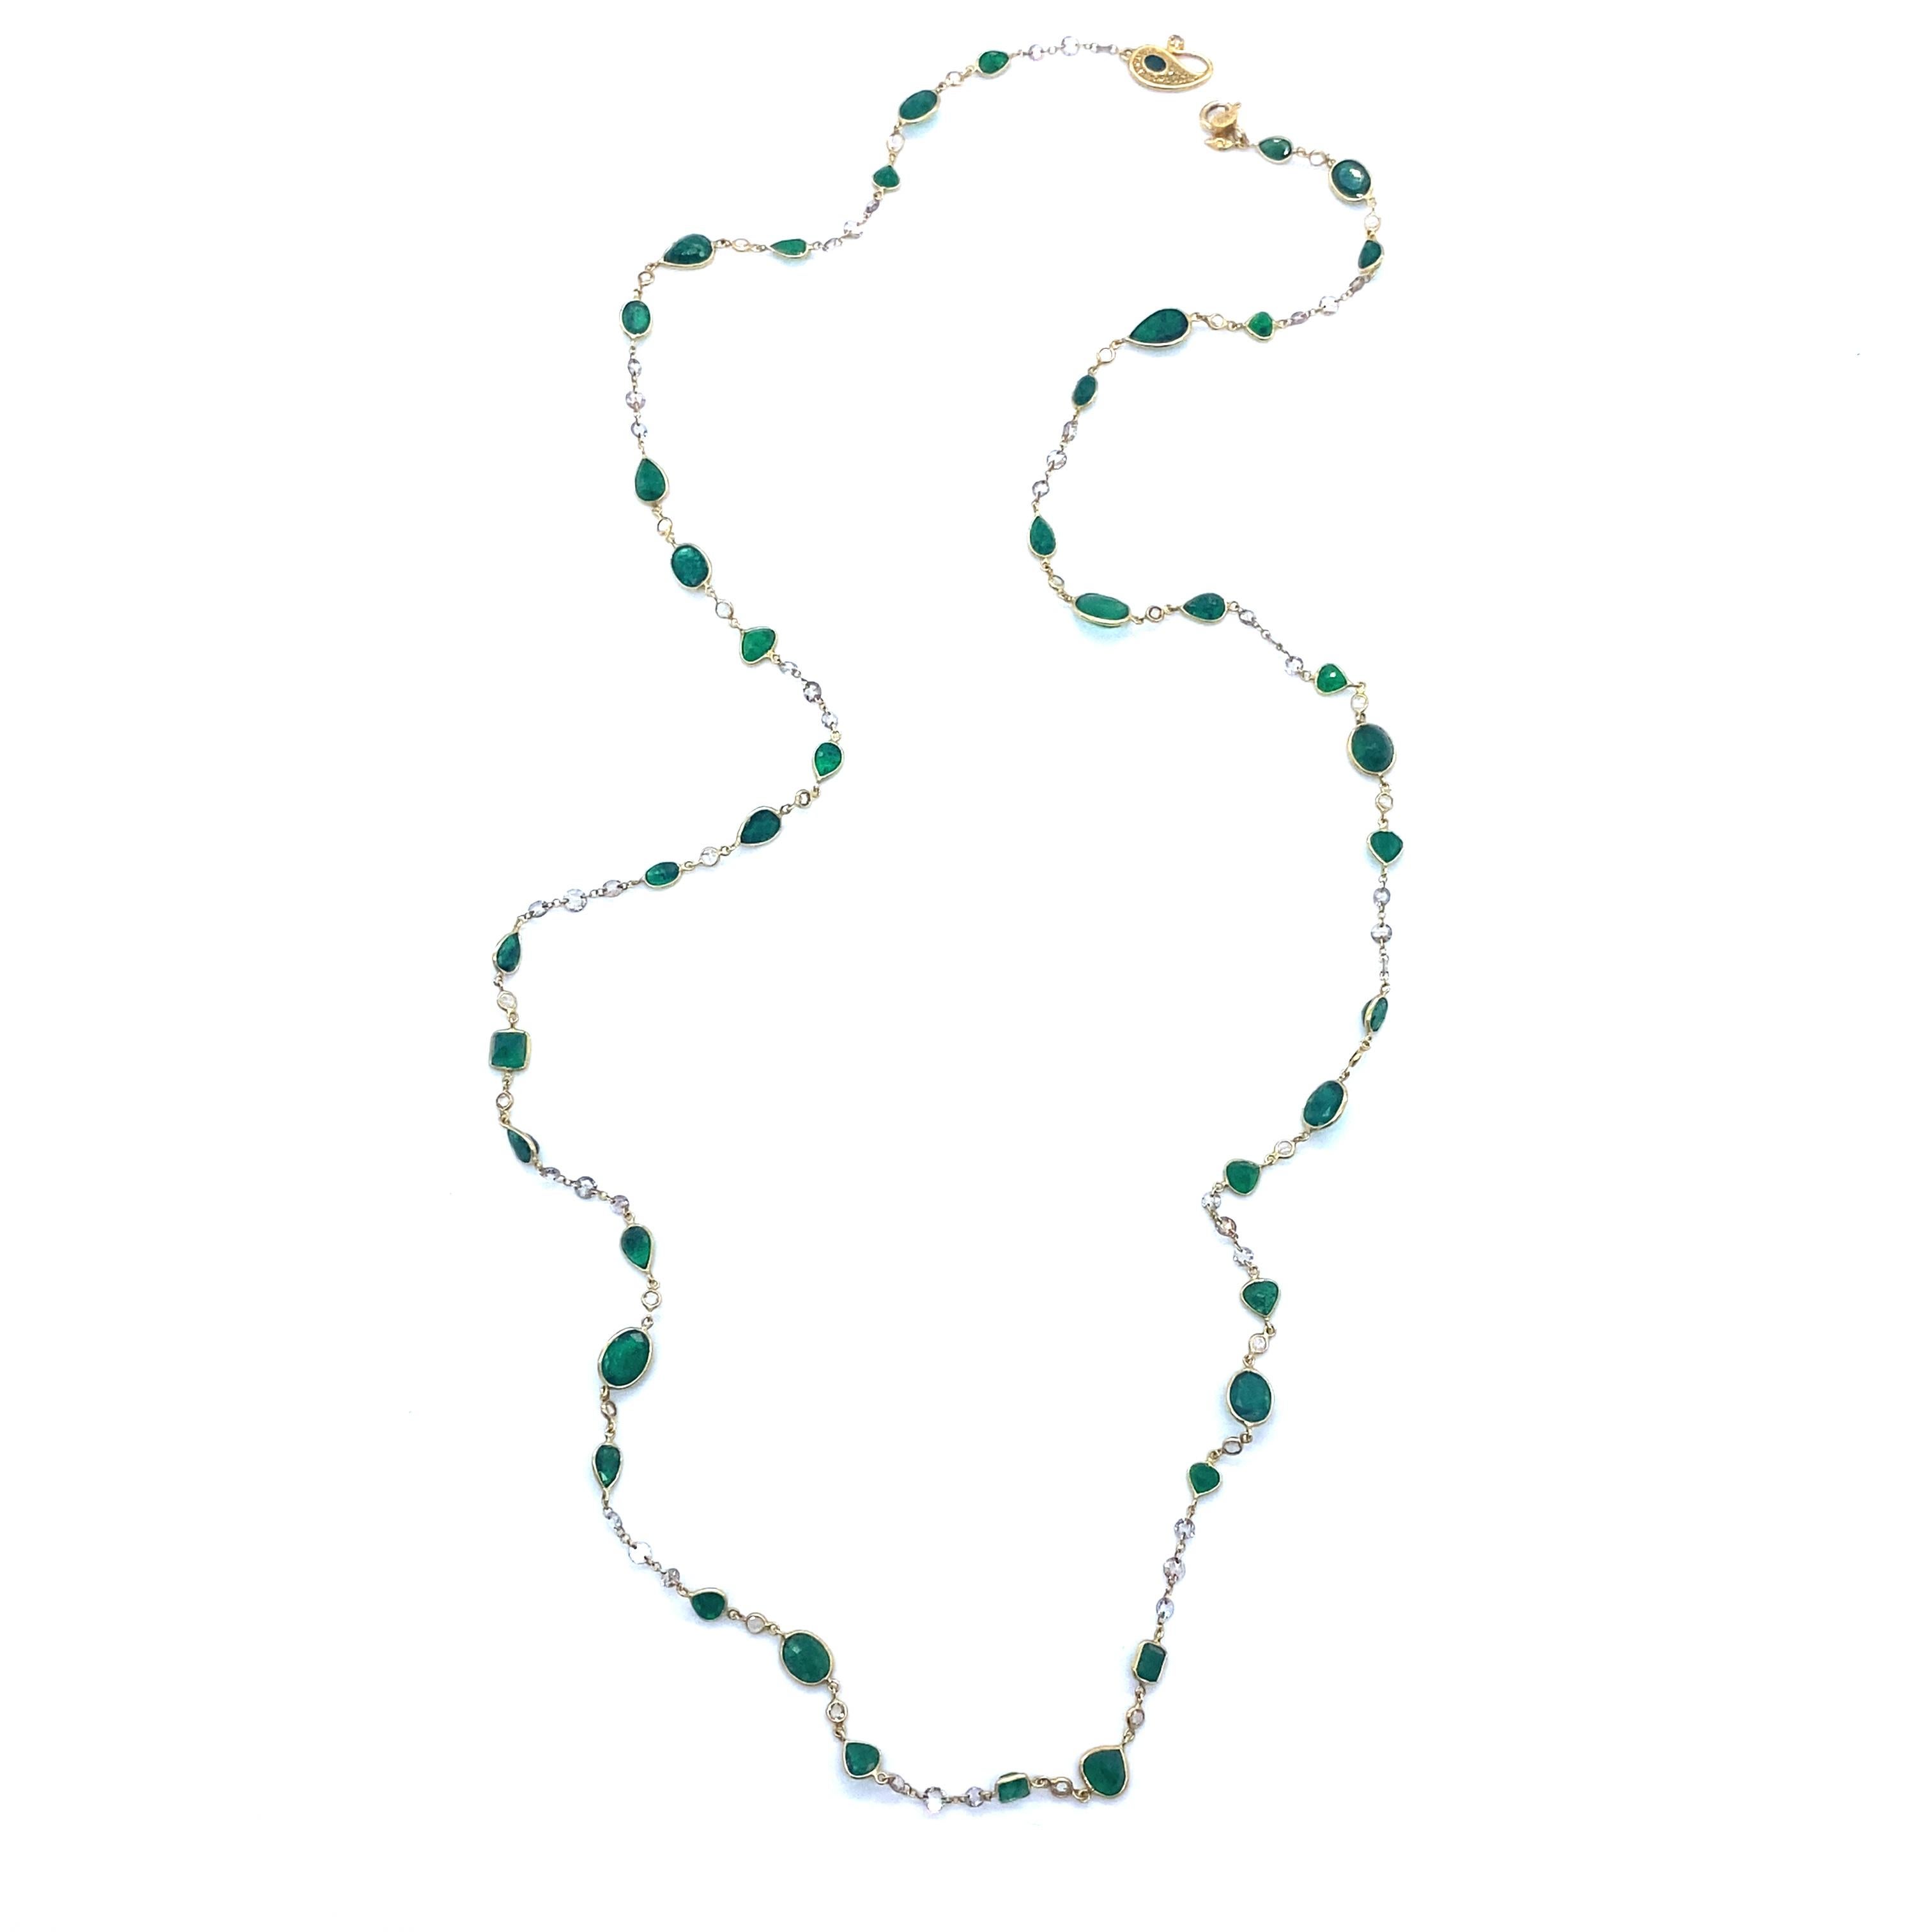 Women's or Men's Emerald and Rose-Cut Diamond Necklace